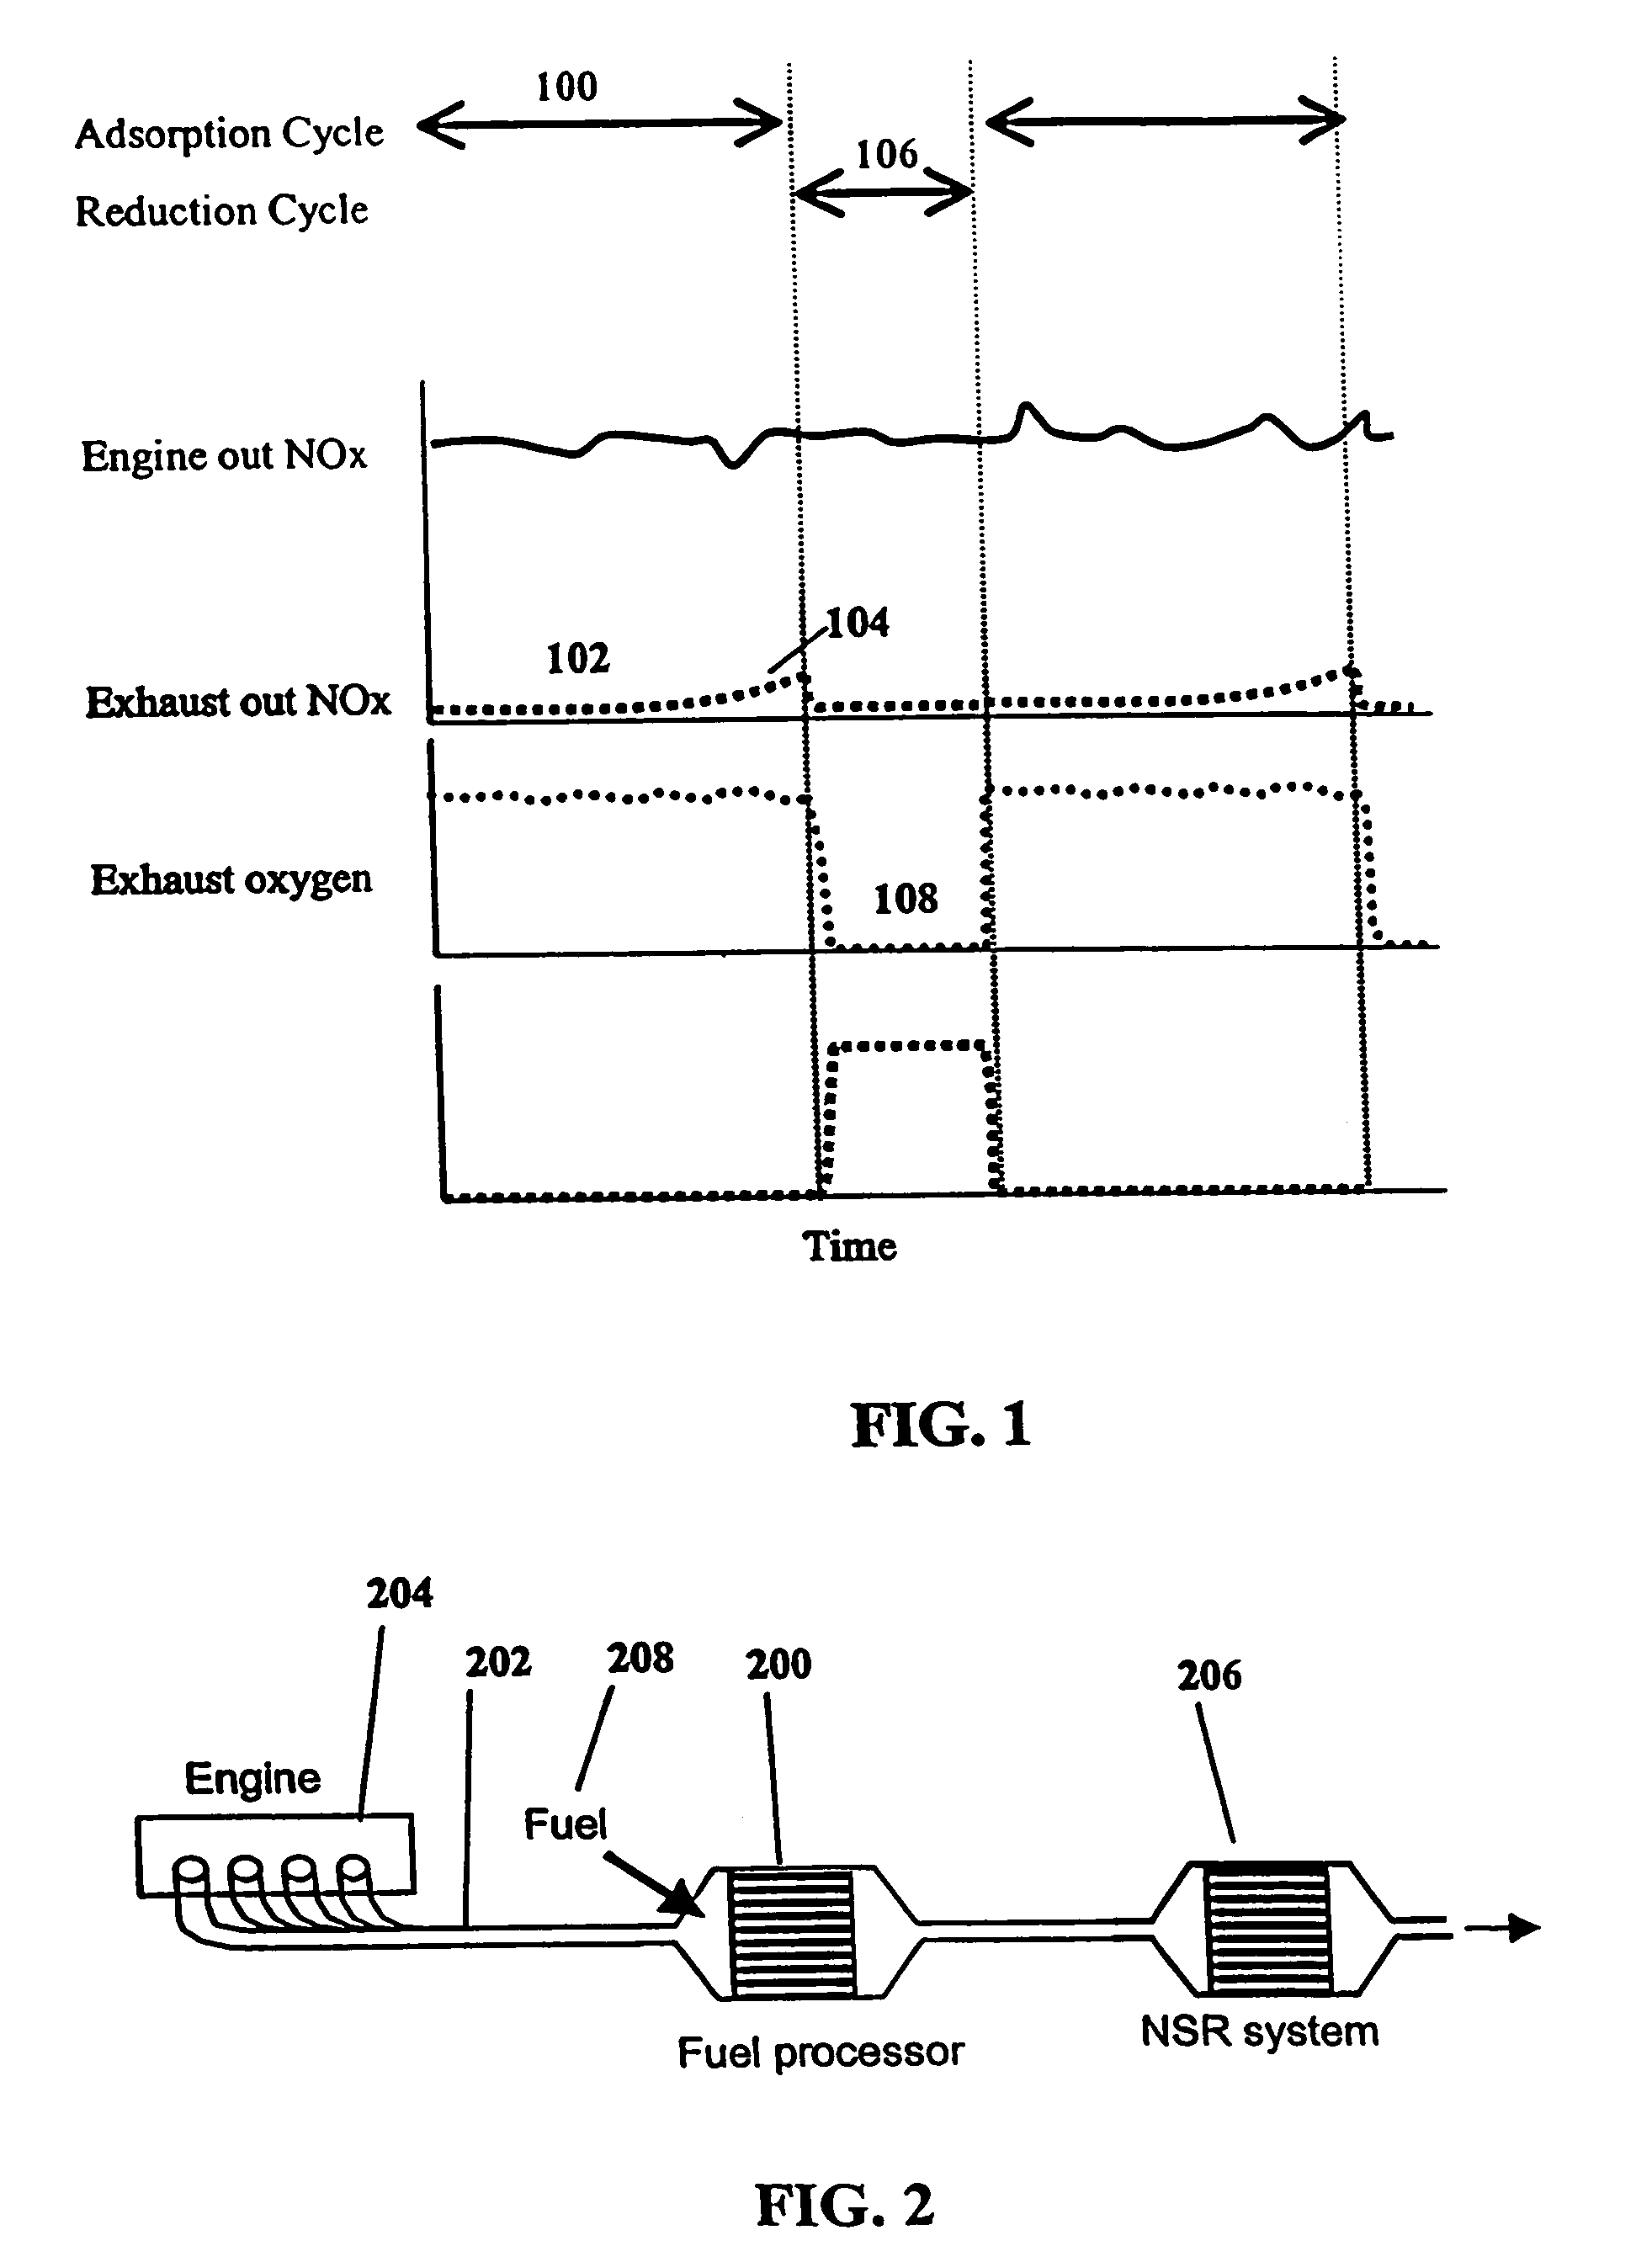 System and methods for improved emission control of internal combustion engines using pulsed fuel flow